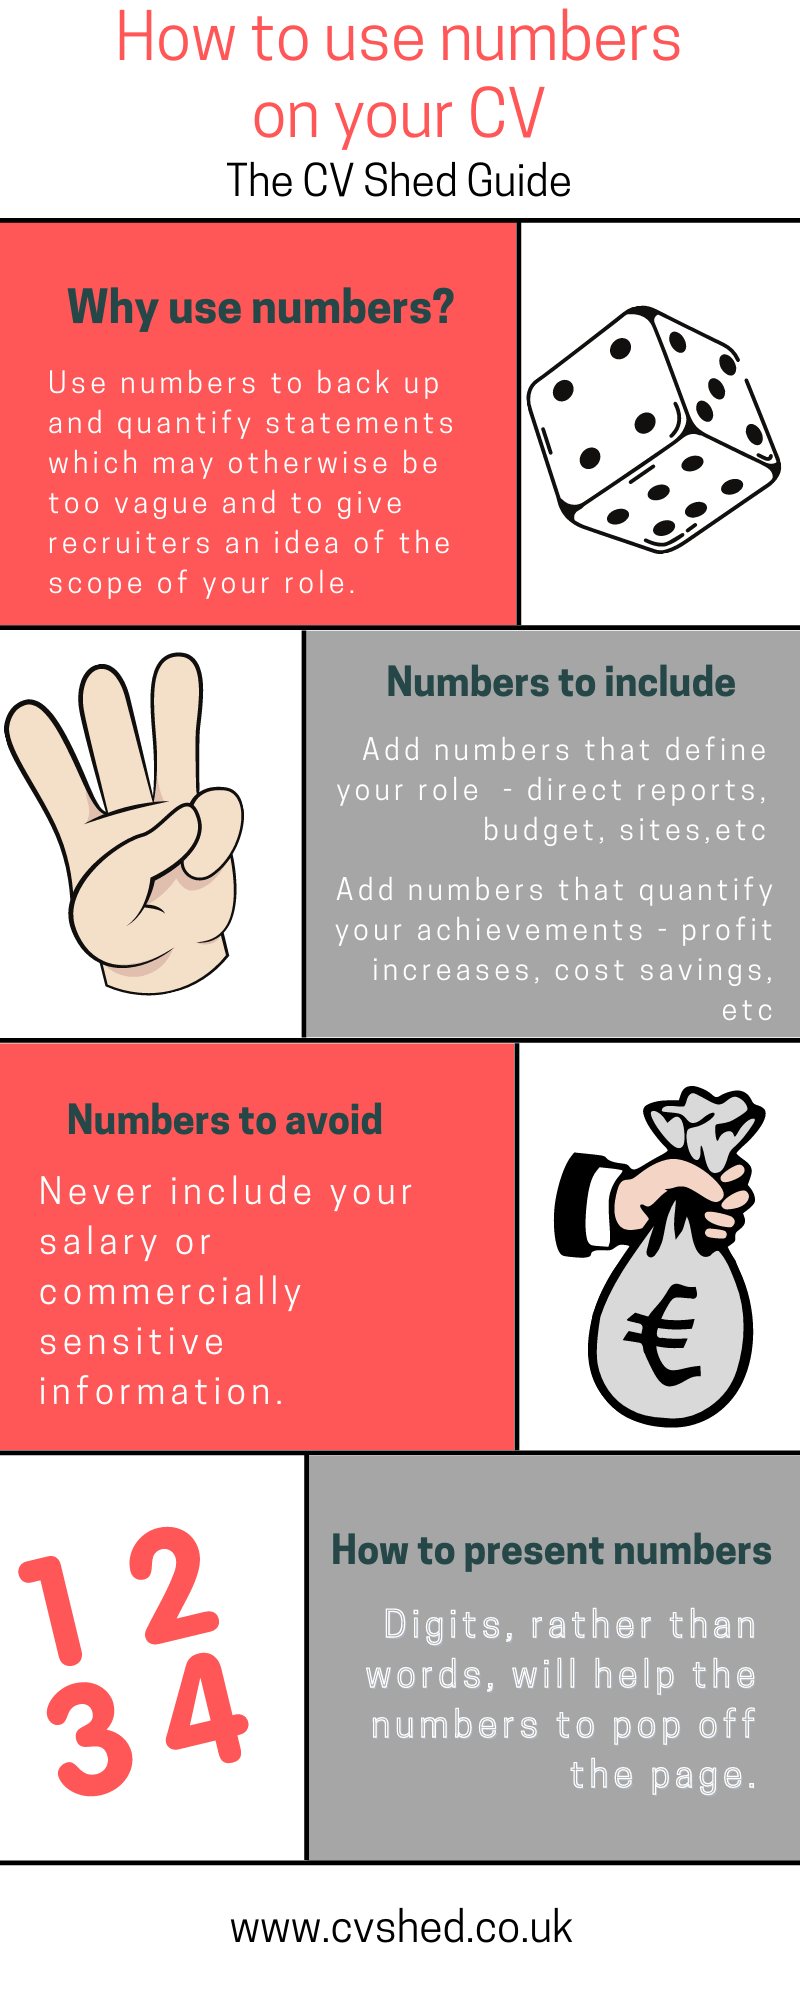 Infographic summarising how to use numbers on your CV